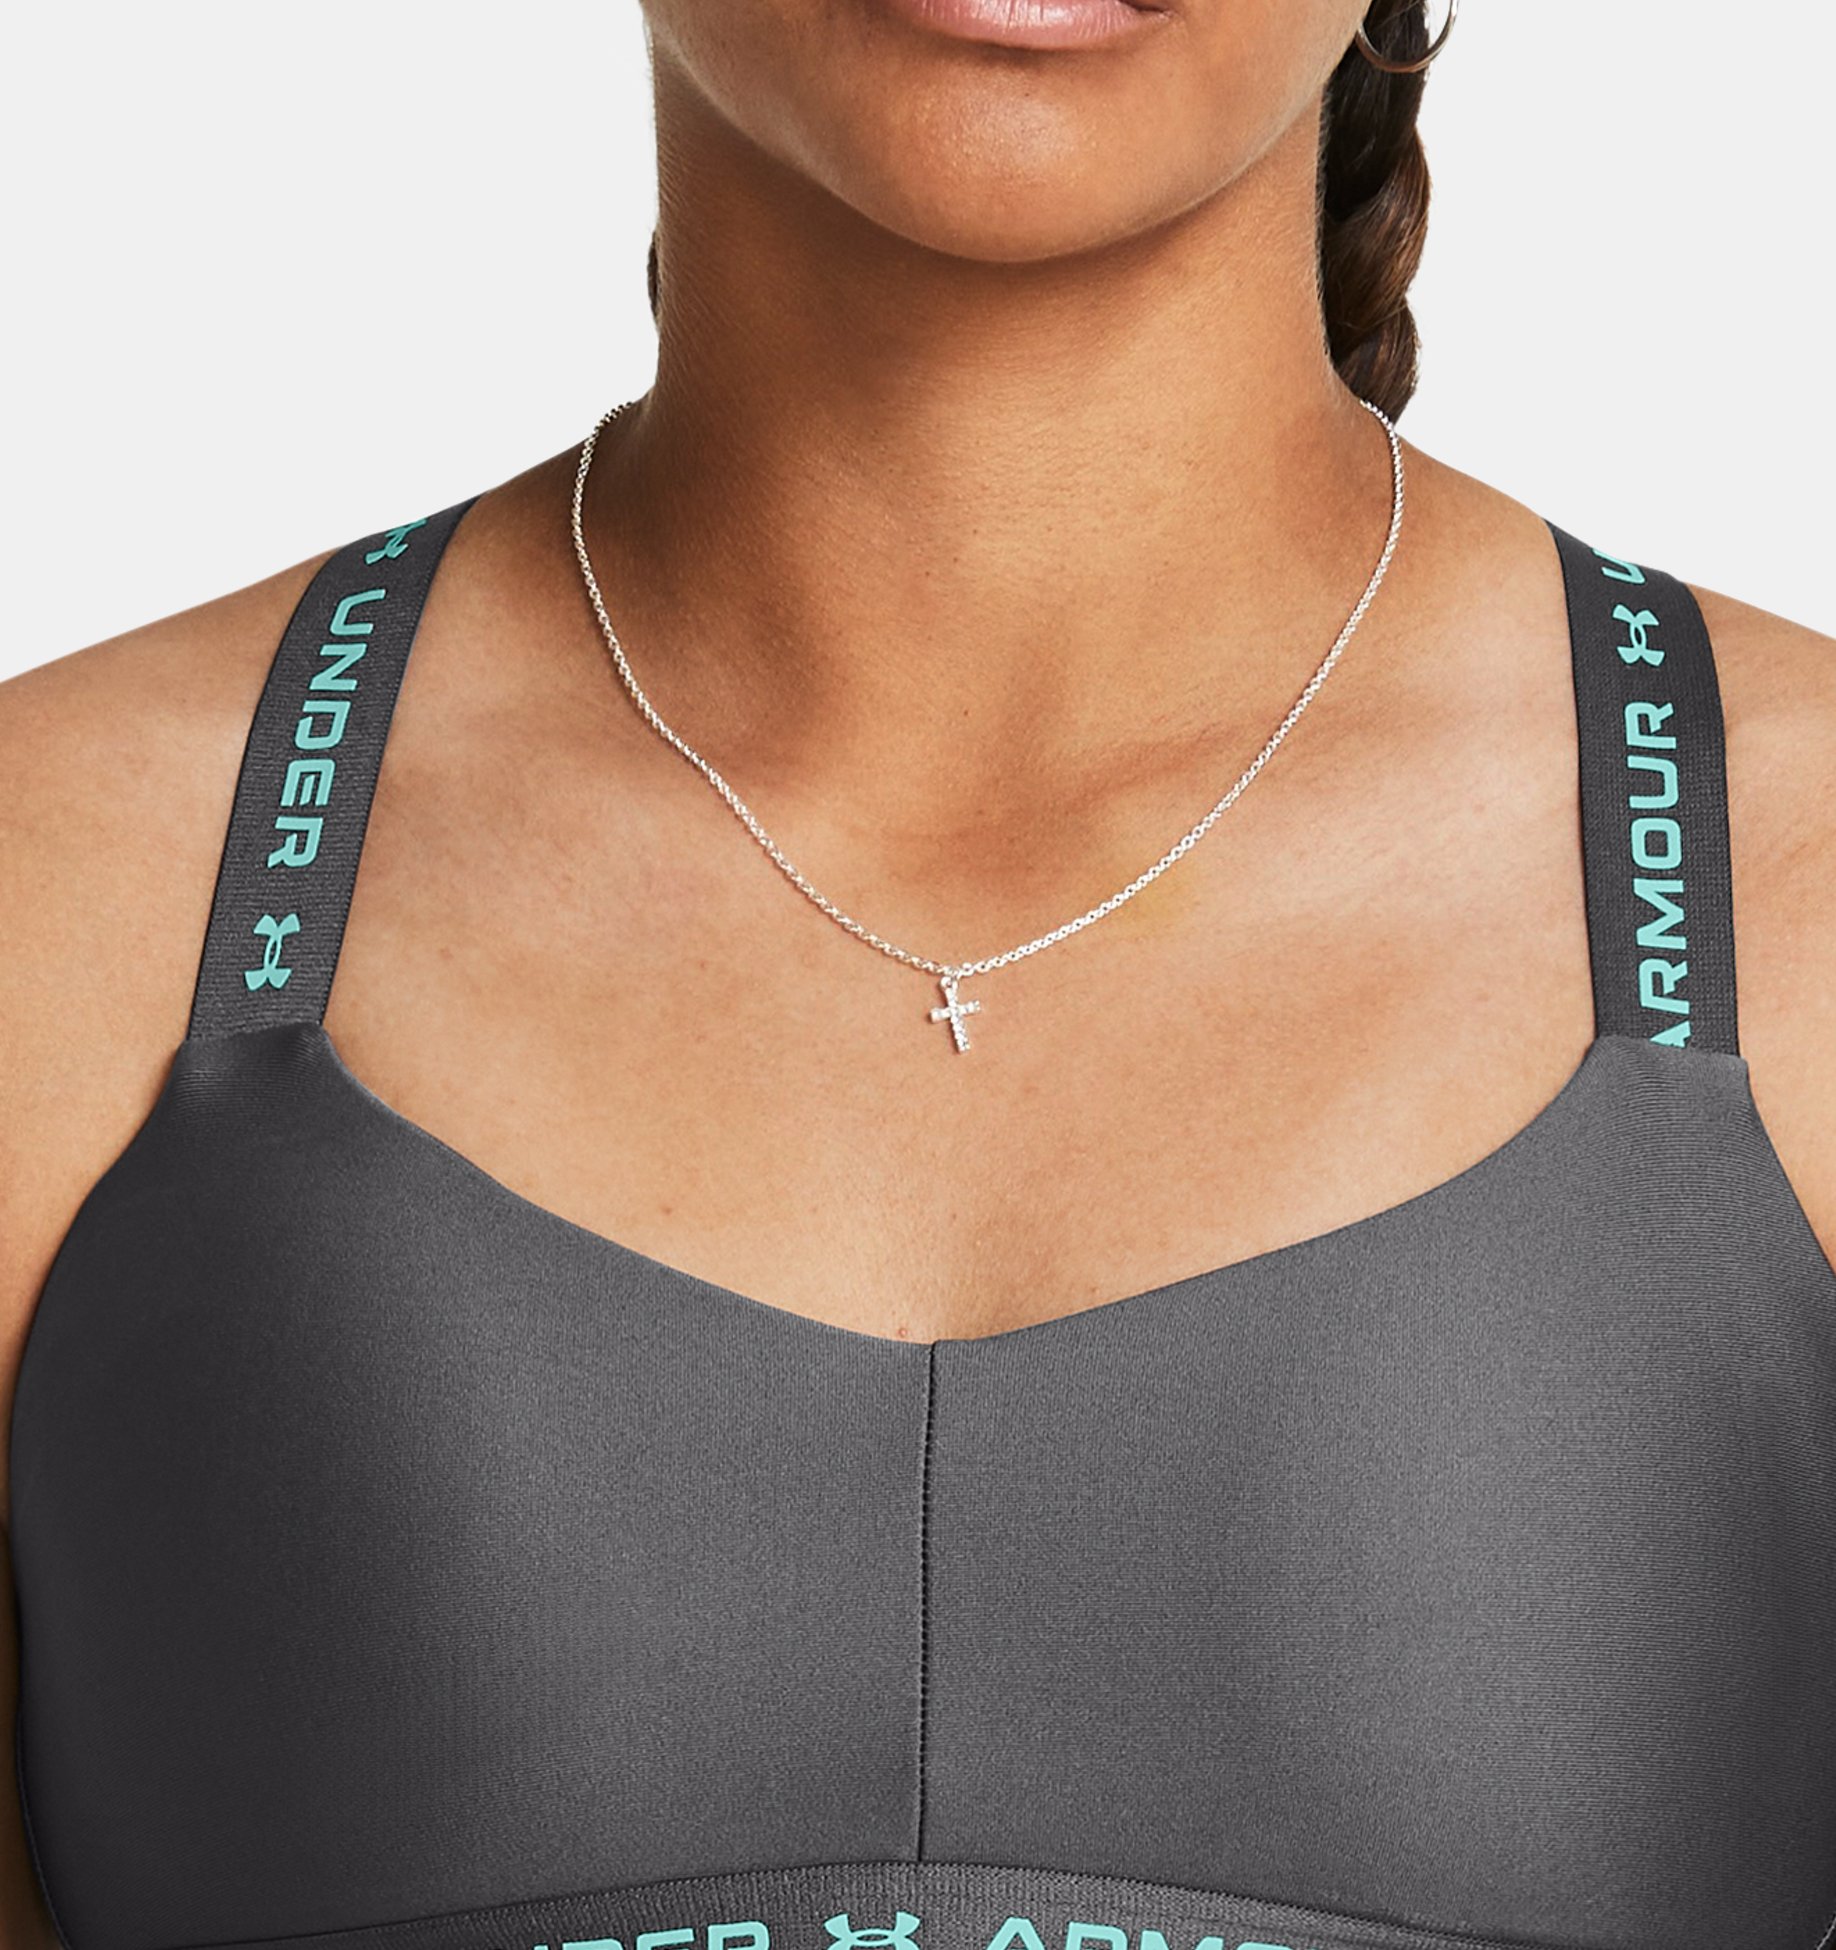 Under Armour, Covered Low Bra, Low Impact Sports Bras